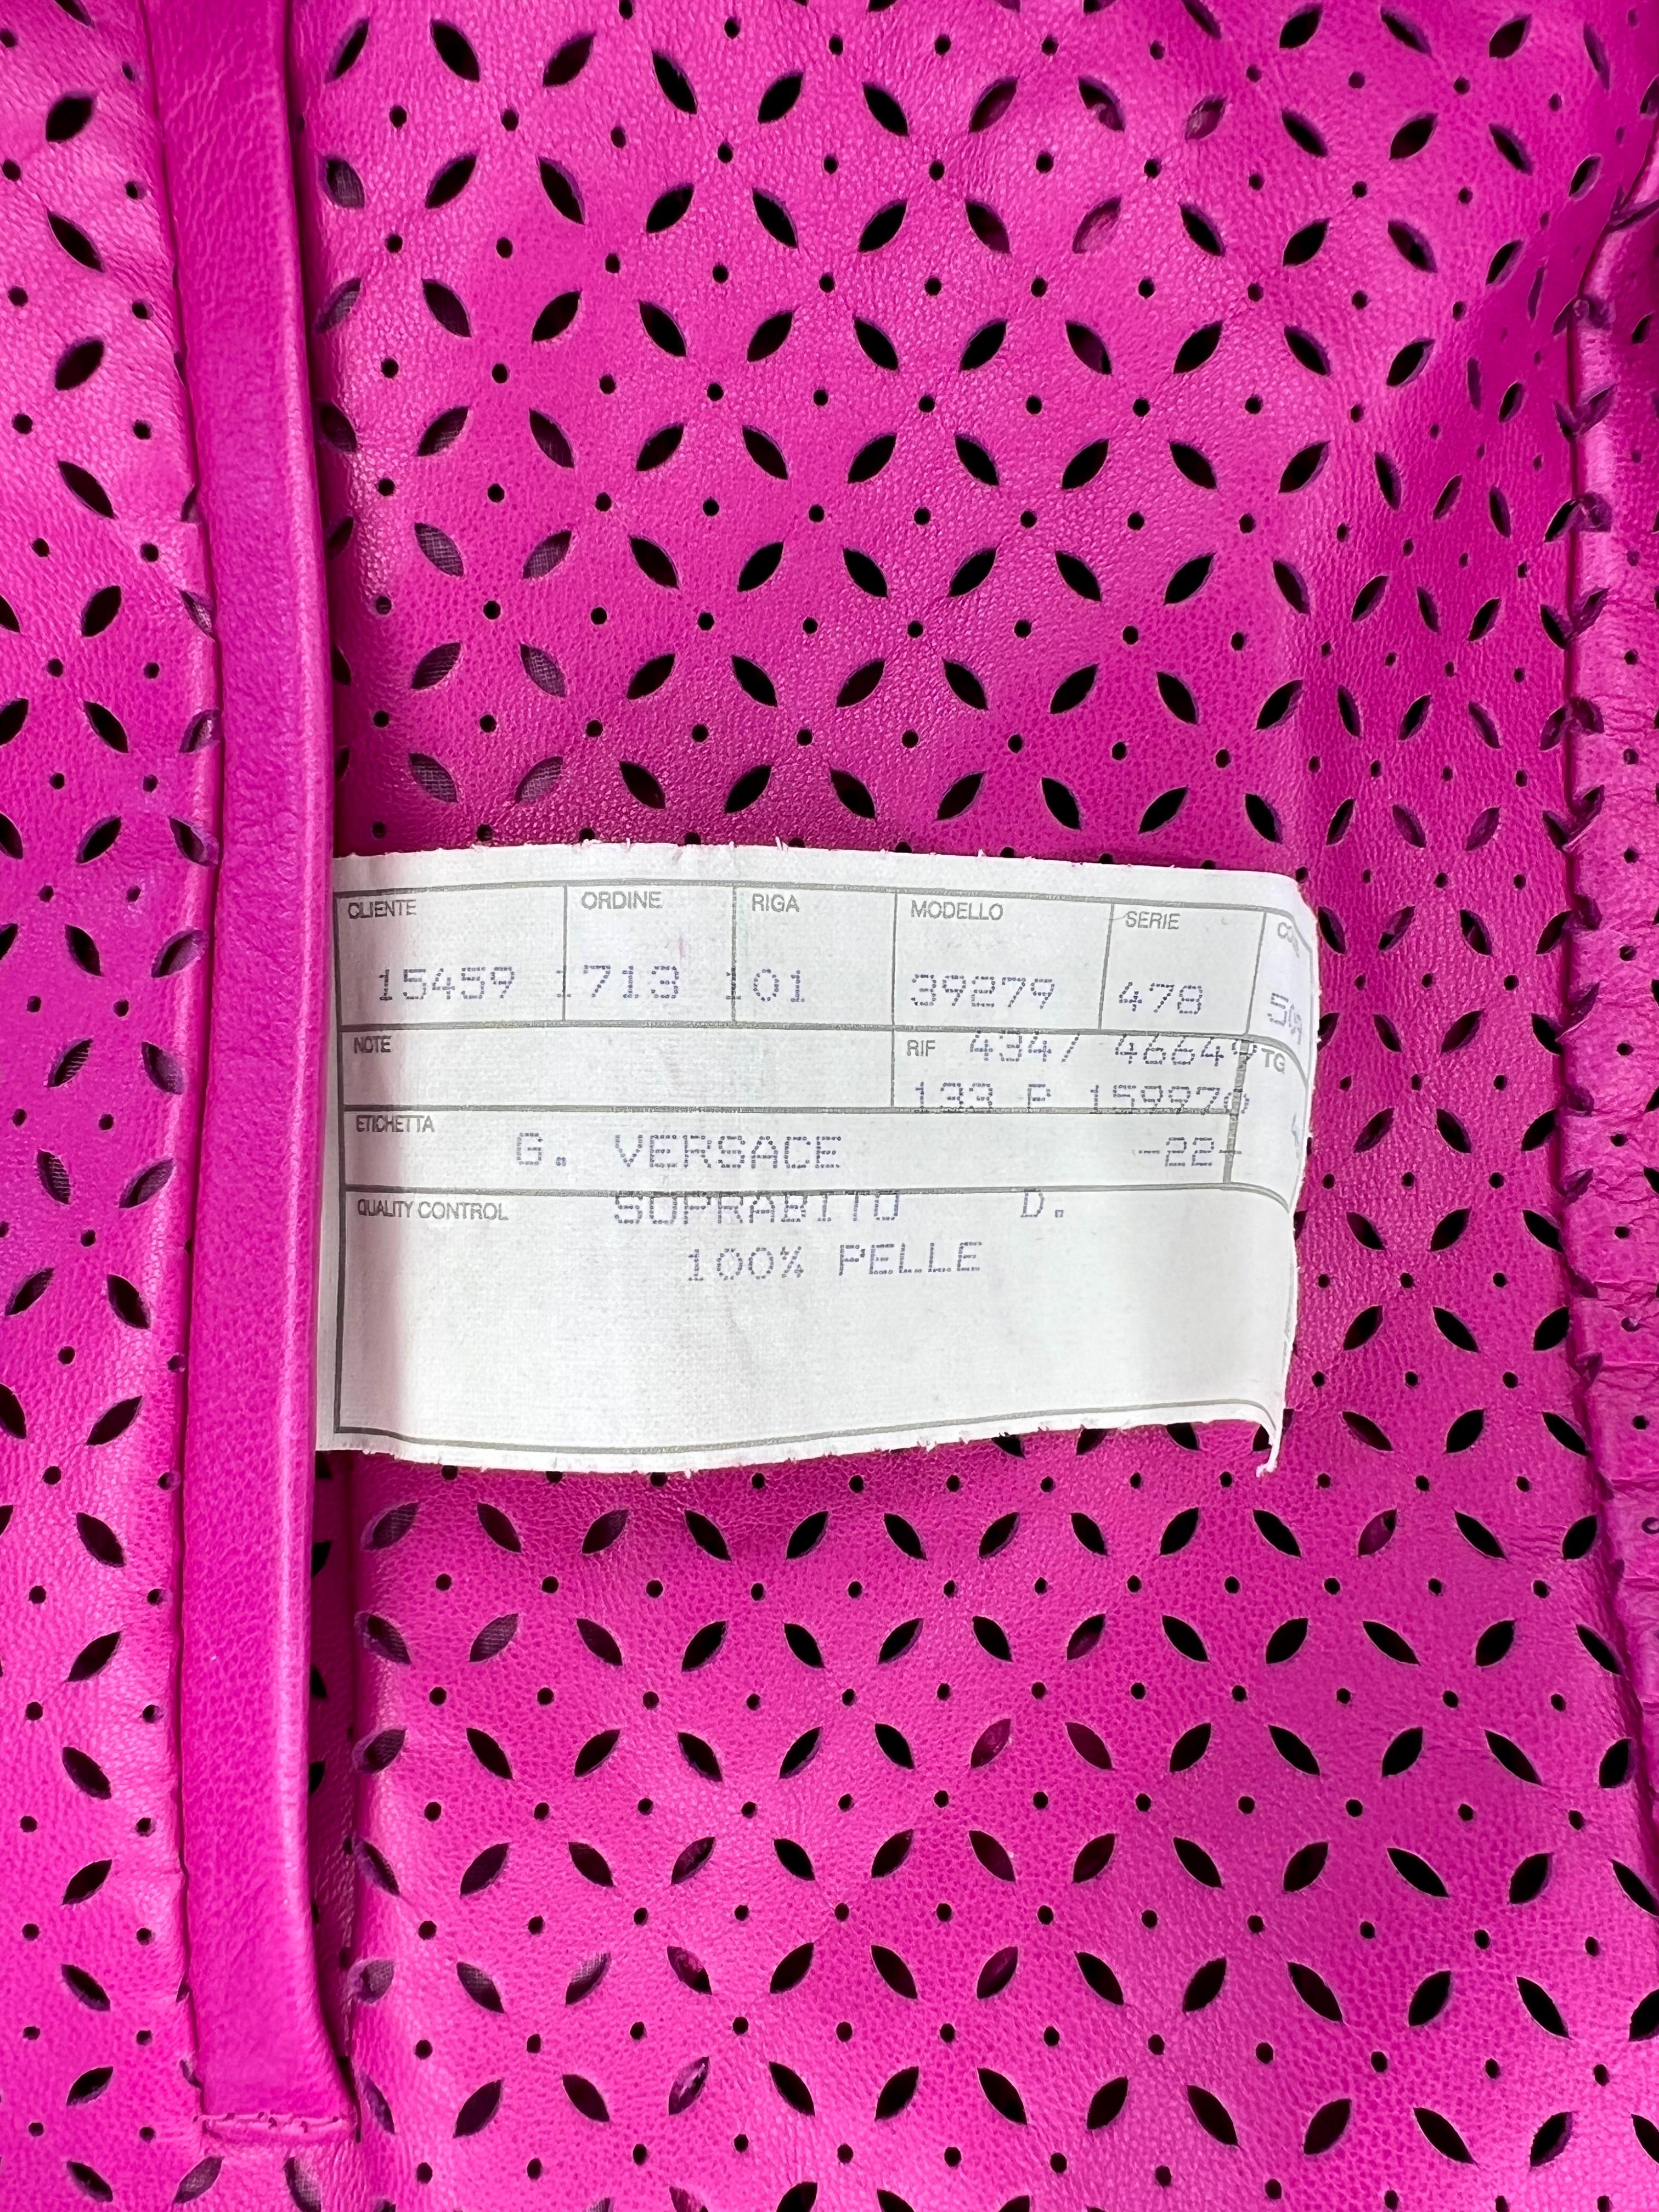 F/W 2002 Gianni Versace by Donatella Runway Pink Perforated Leather Coat  For Sale 3